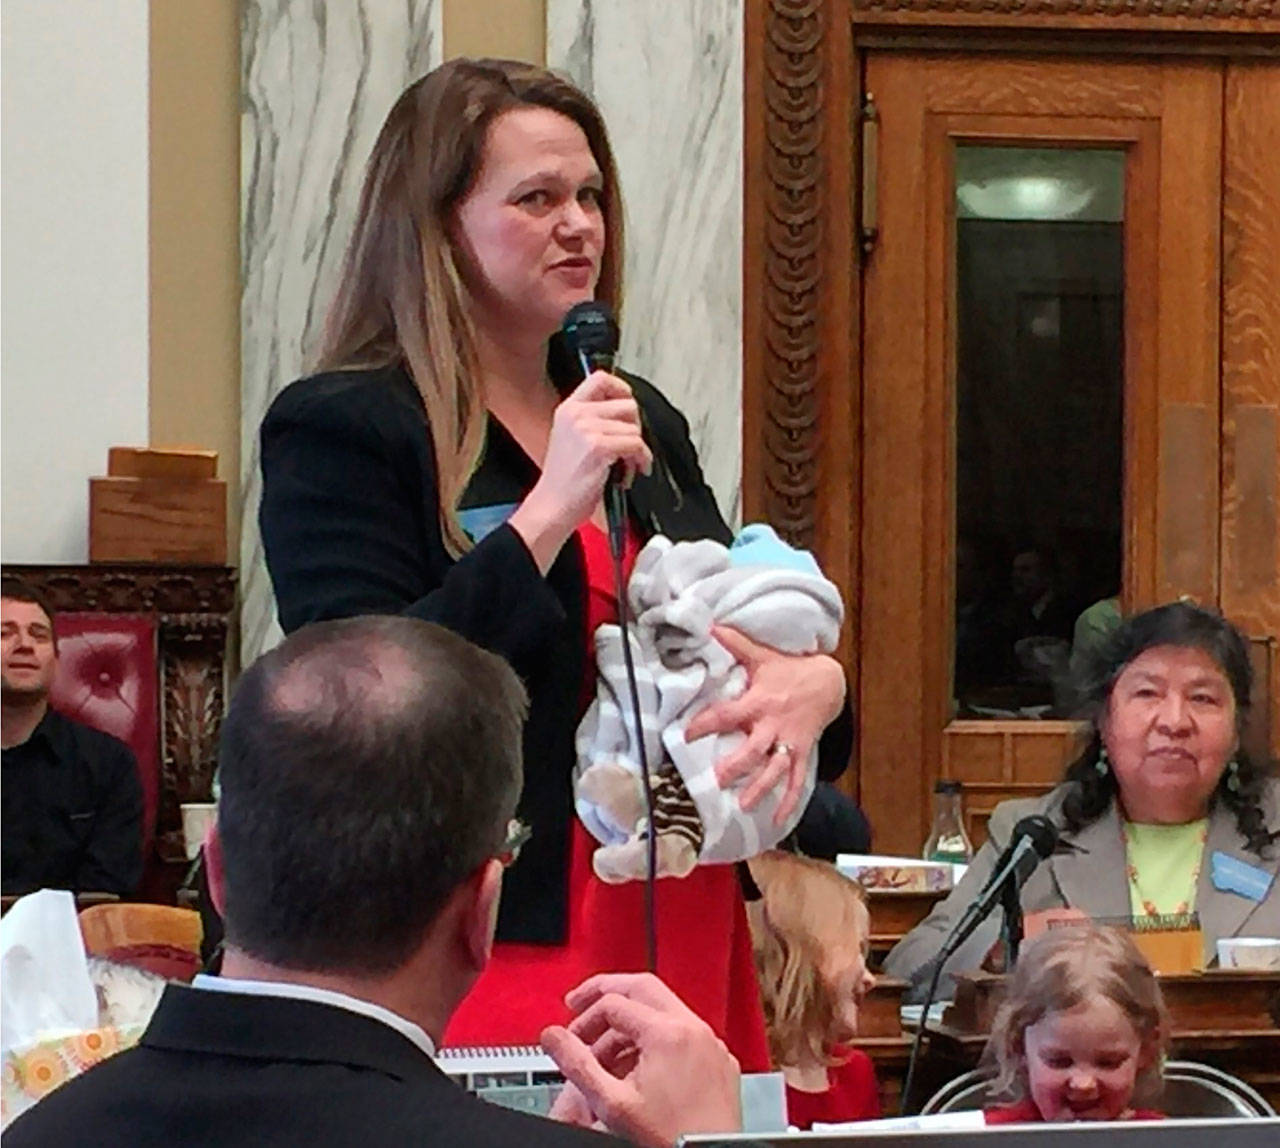 Rep. Kimberly Dudik speaks on the floor of the Legislature holding her newborn son, Marcutio, in Helena, Mont., in 2017. As experts predict another banner year of women running for office, hurdles remain particularly for those like Dudik who have young children. (Rep. Nate McConnell/Rep. Kimberly Dudik via AP)